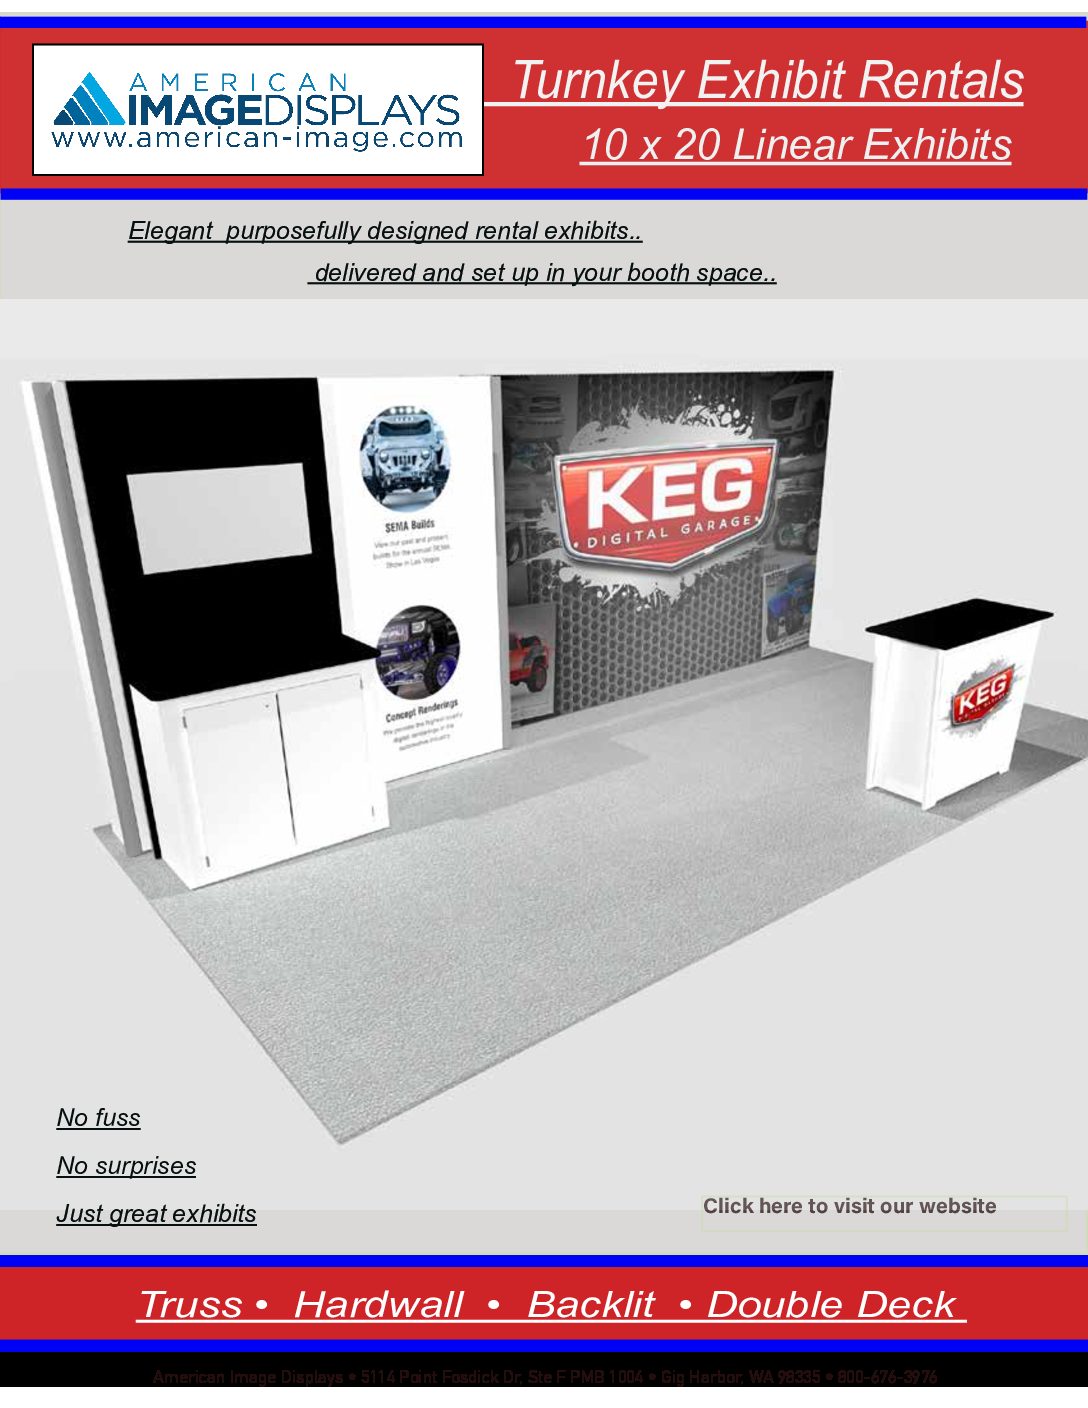 Turnkey Rental of Inline 10x20 Booths